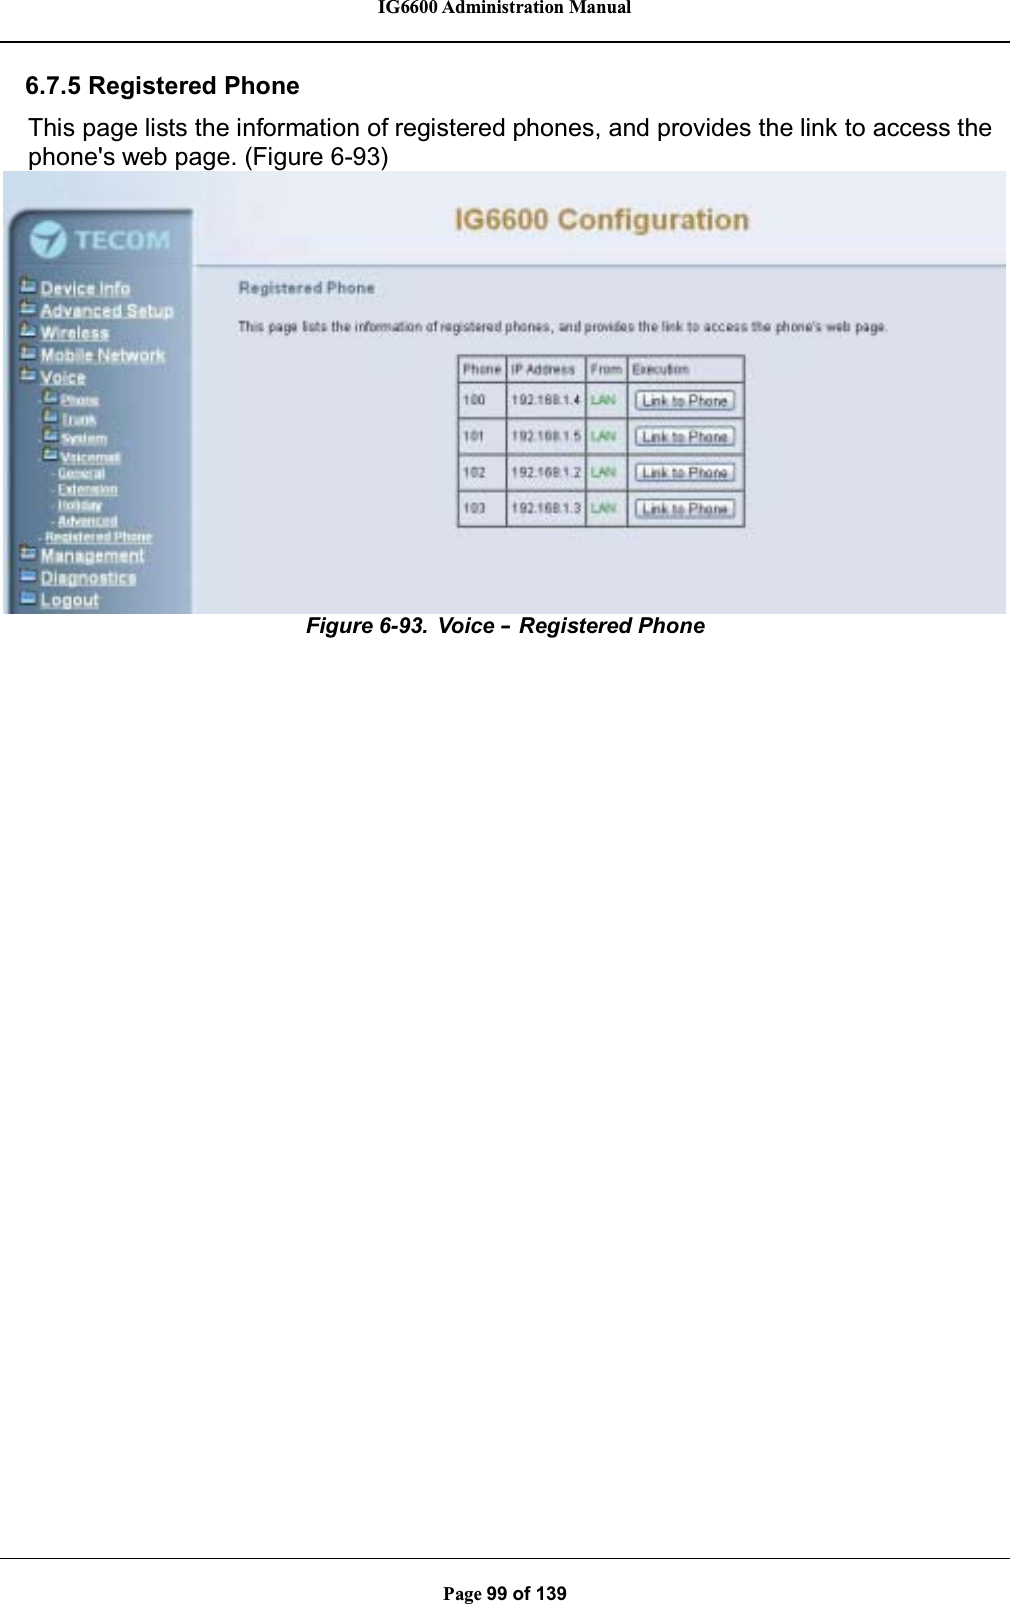 IG6600 Administration ManualPage 99 of 1396.7.5 Registered PhoneThis page lists the information of registered phones, and provides the link to access thephone&apos;s web page. (Figure 6-93)Figure 6-93. Voice –Registered Phone